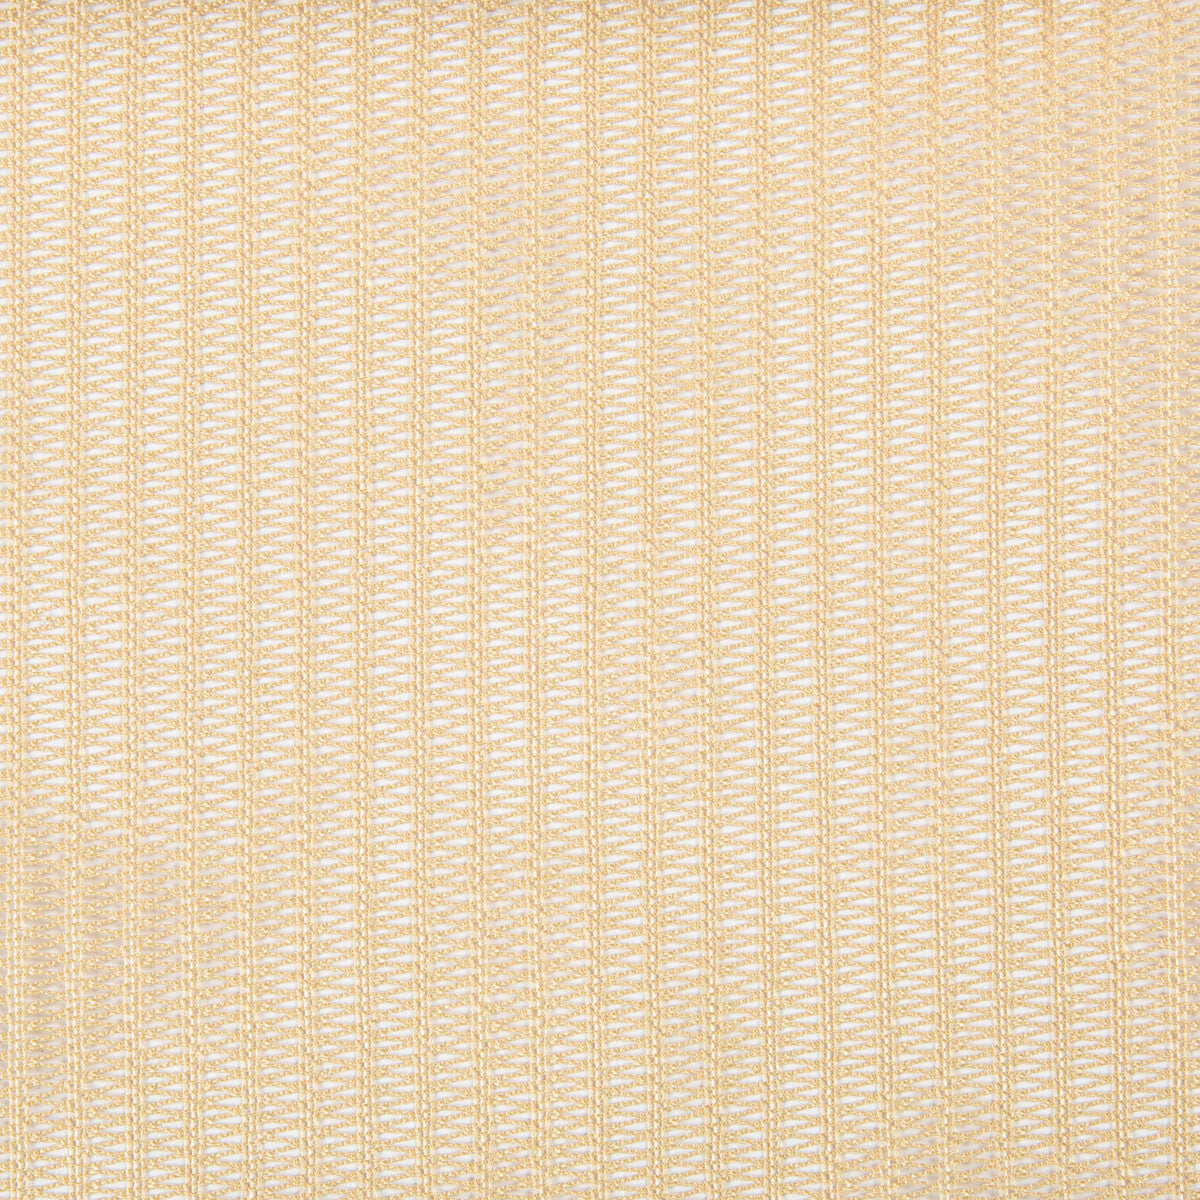 Gish fabric in soft gold color - pattern 4277.16.0 - by Kravet Contract